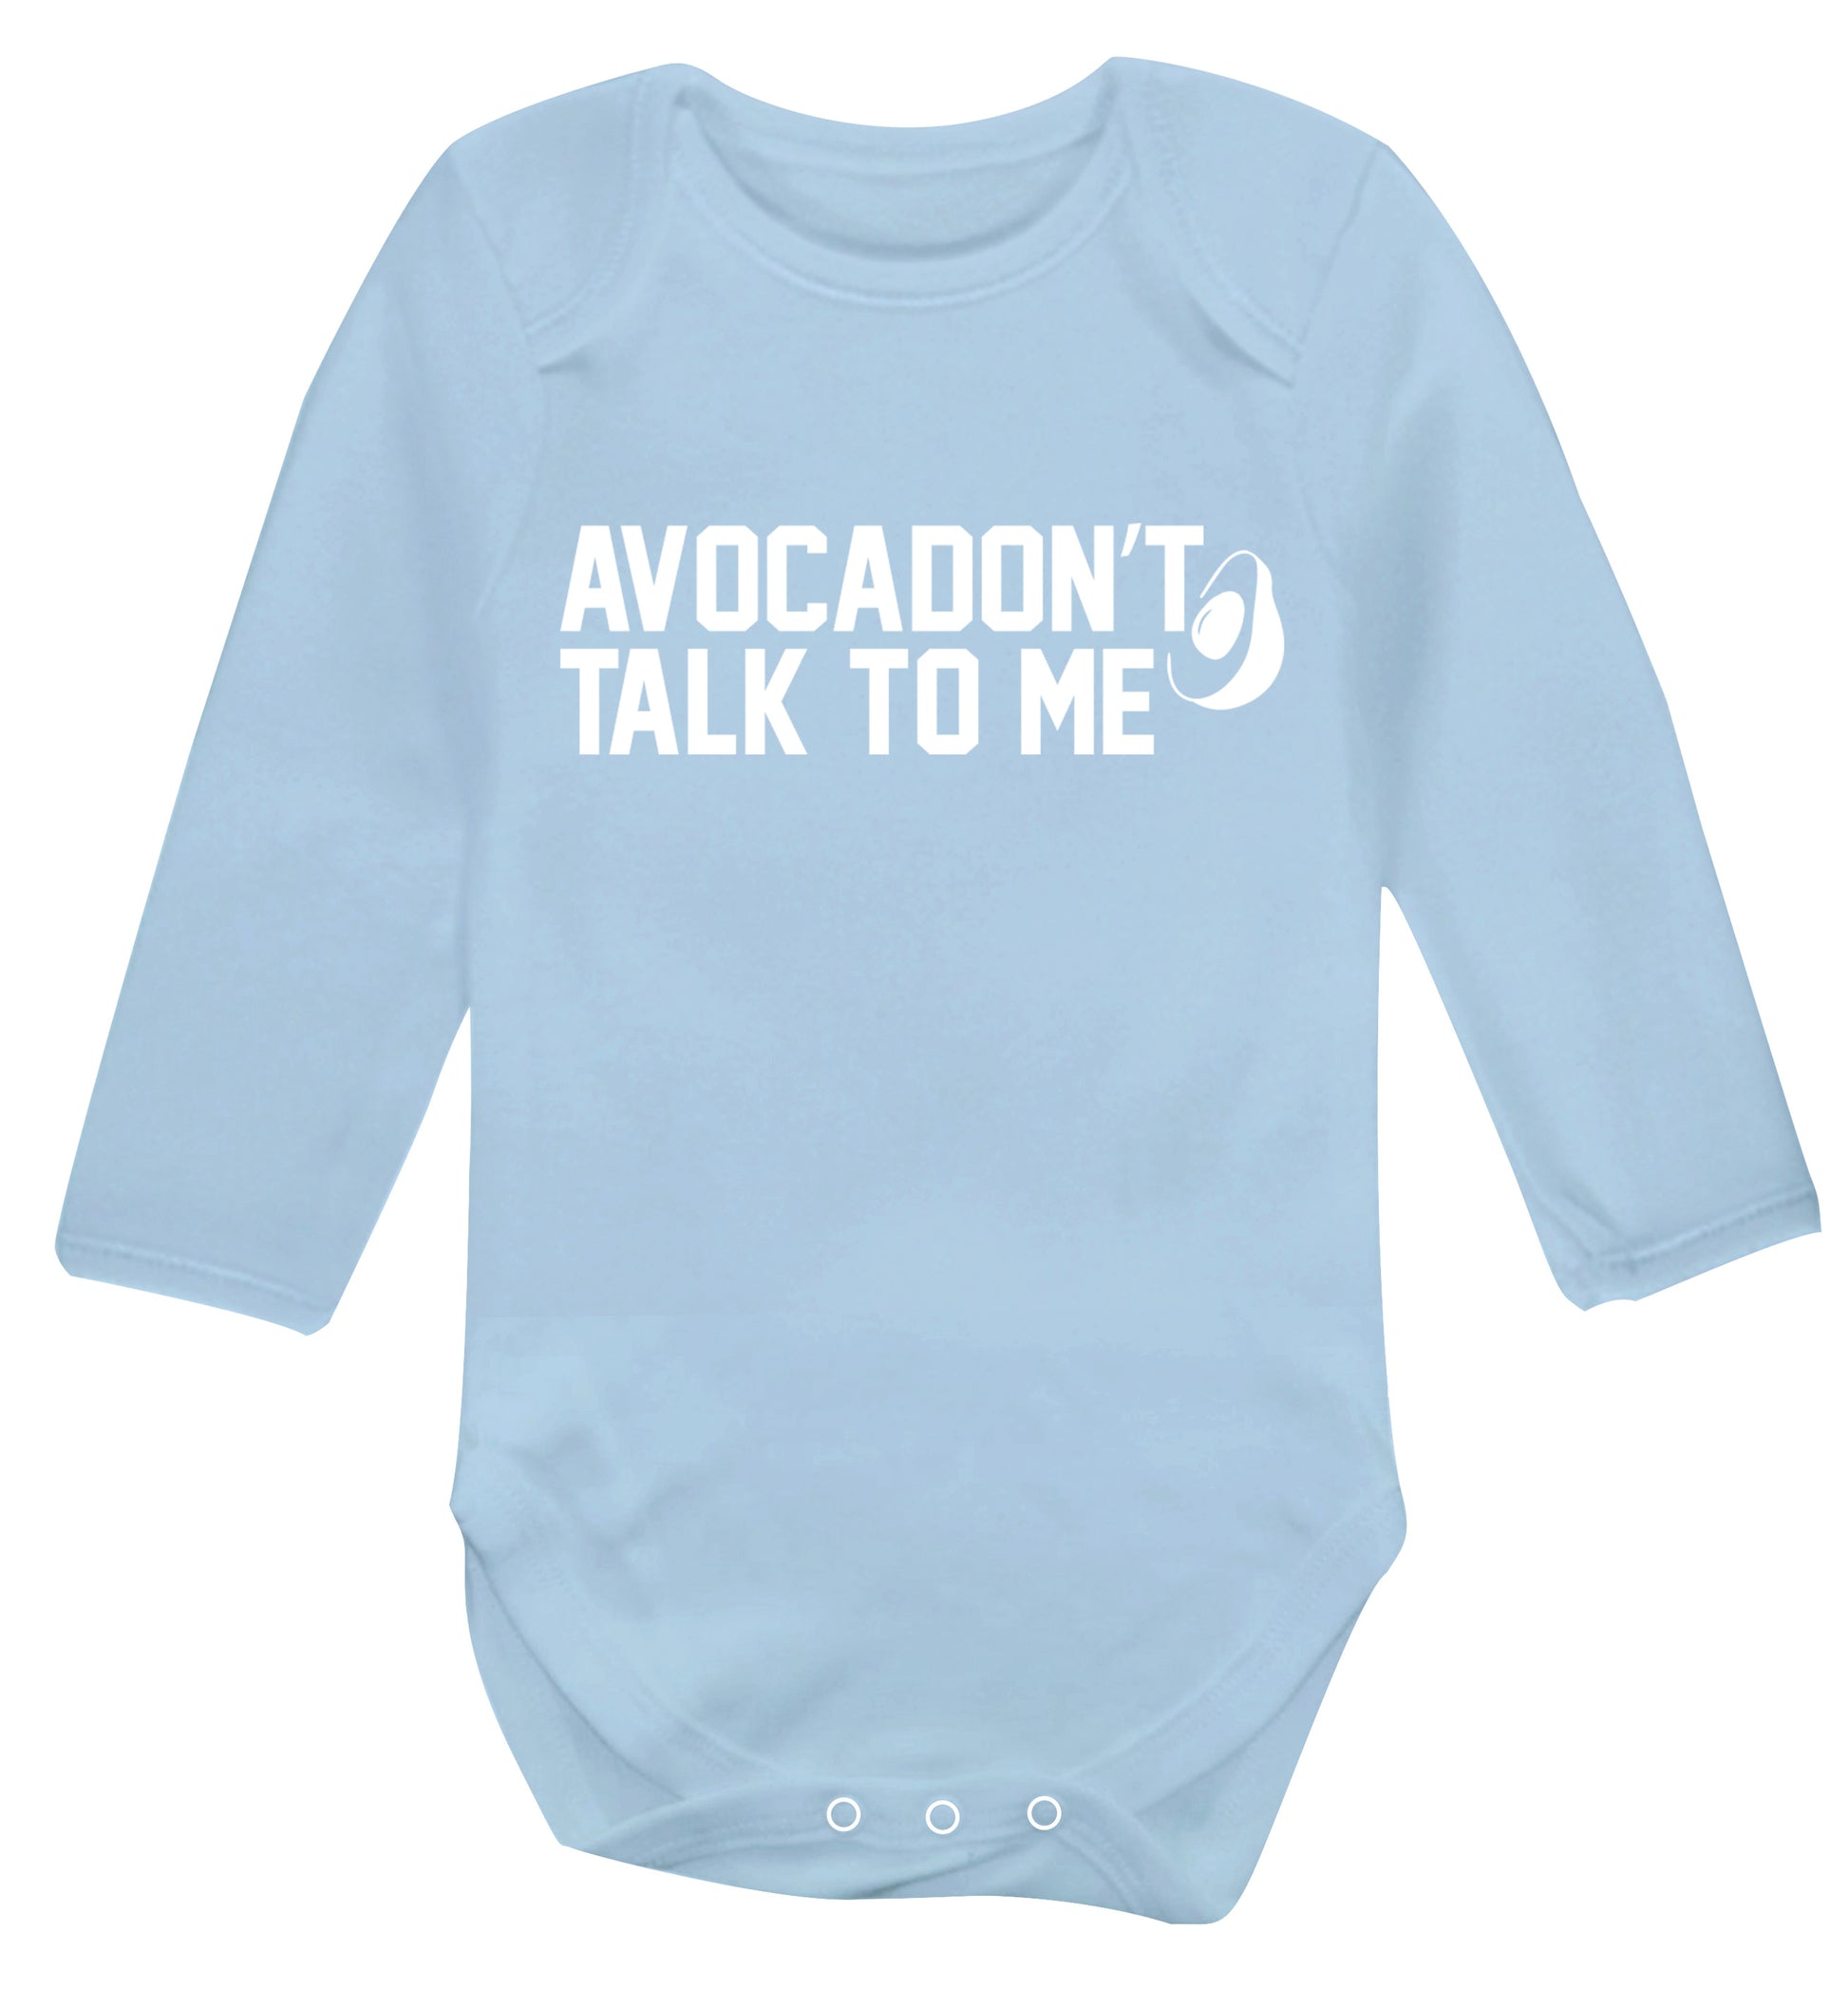 Avocadon't talk to me Baby Vest long sleeved pale blue 6-12 months